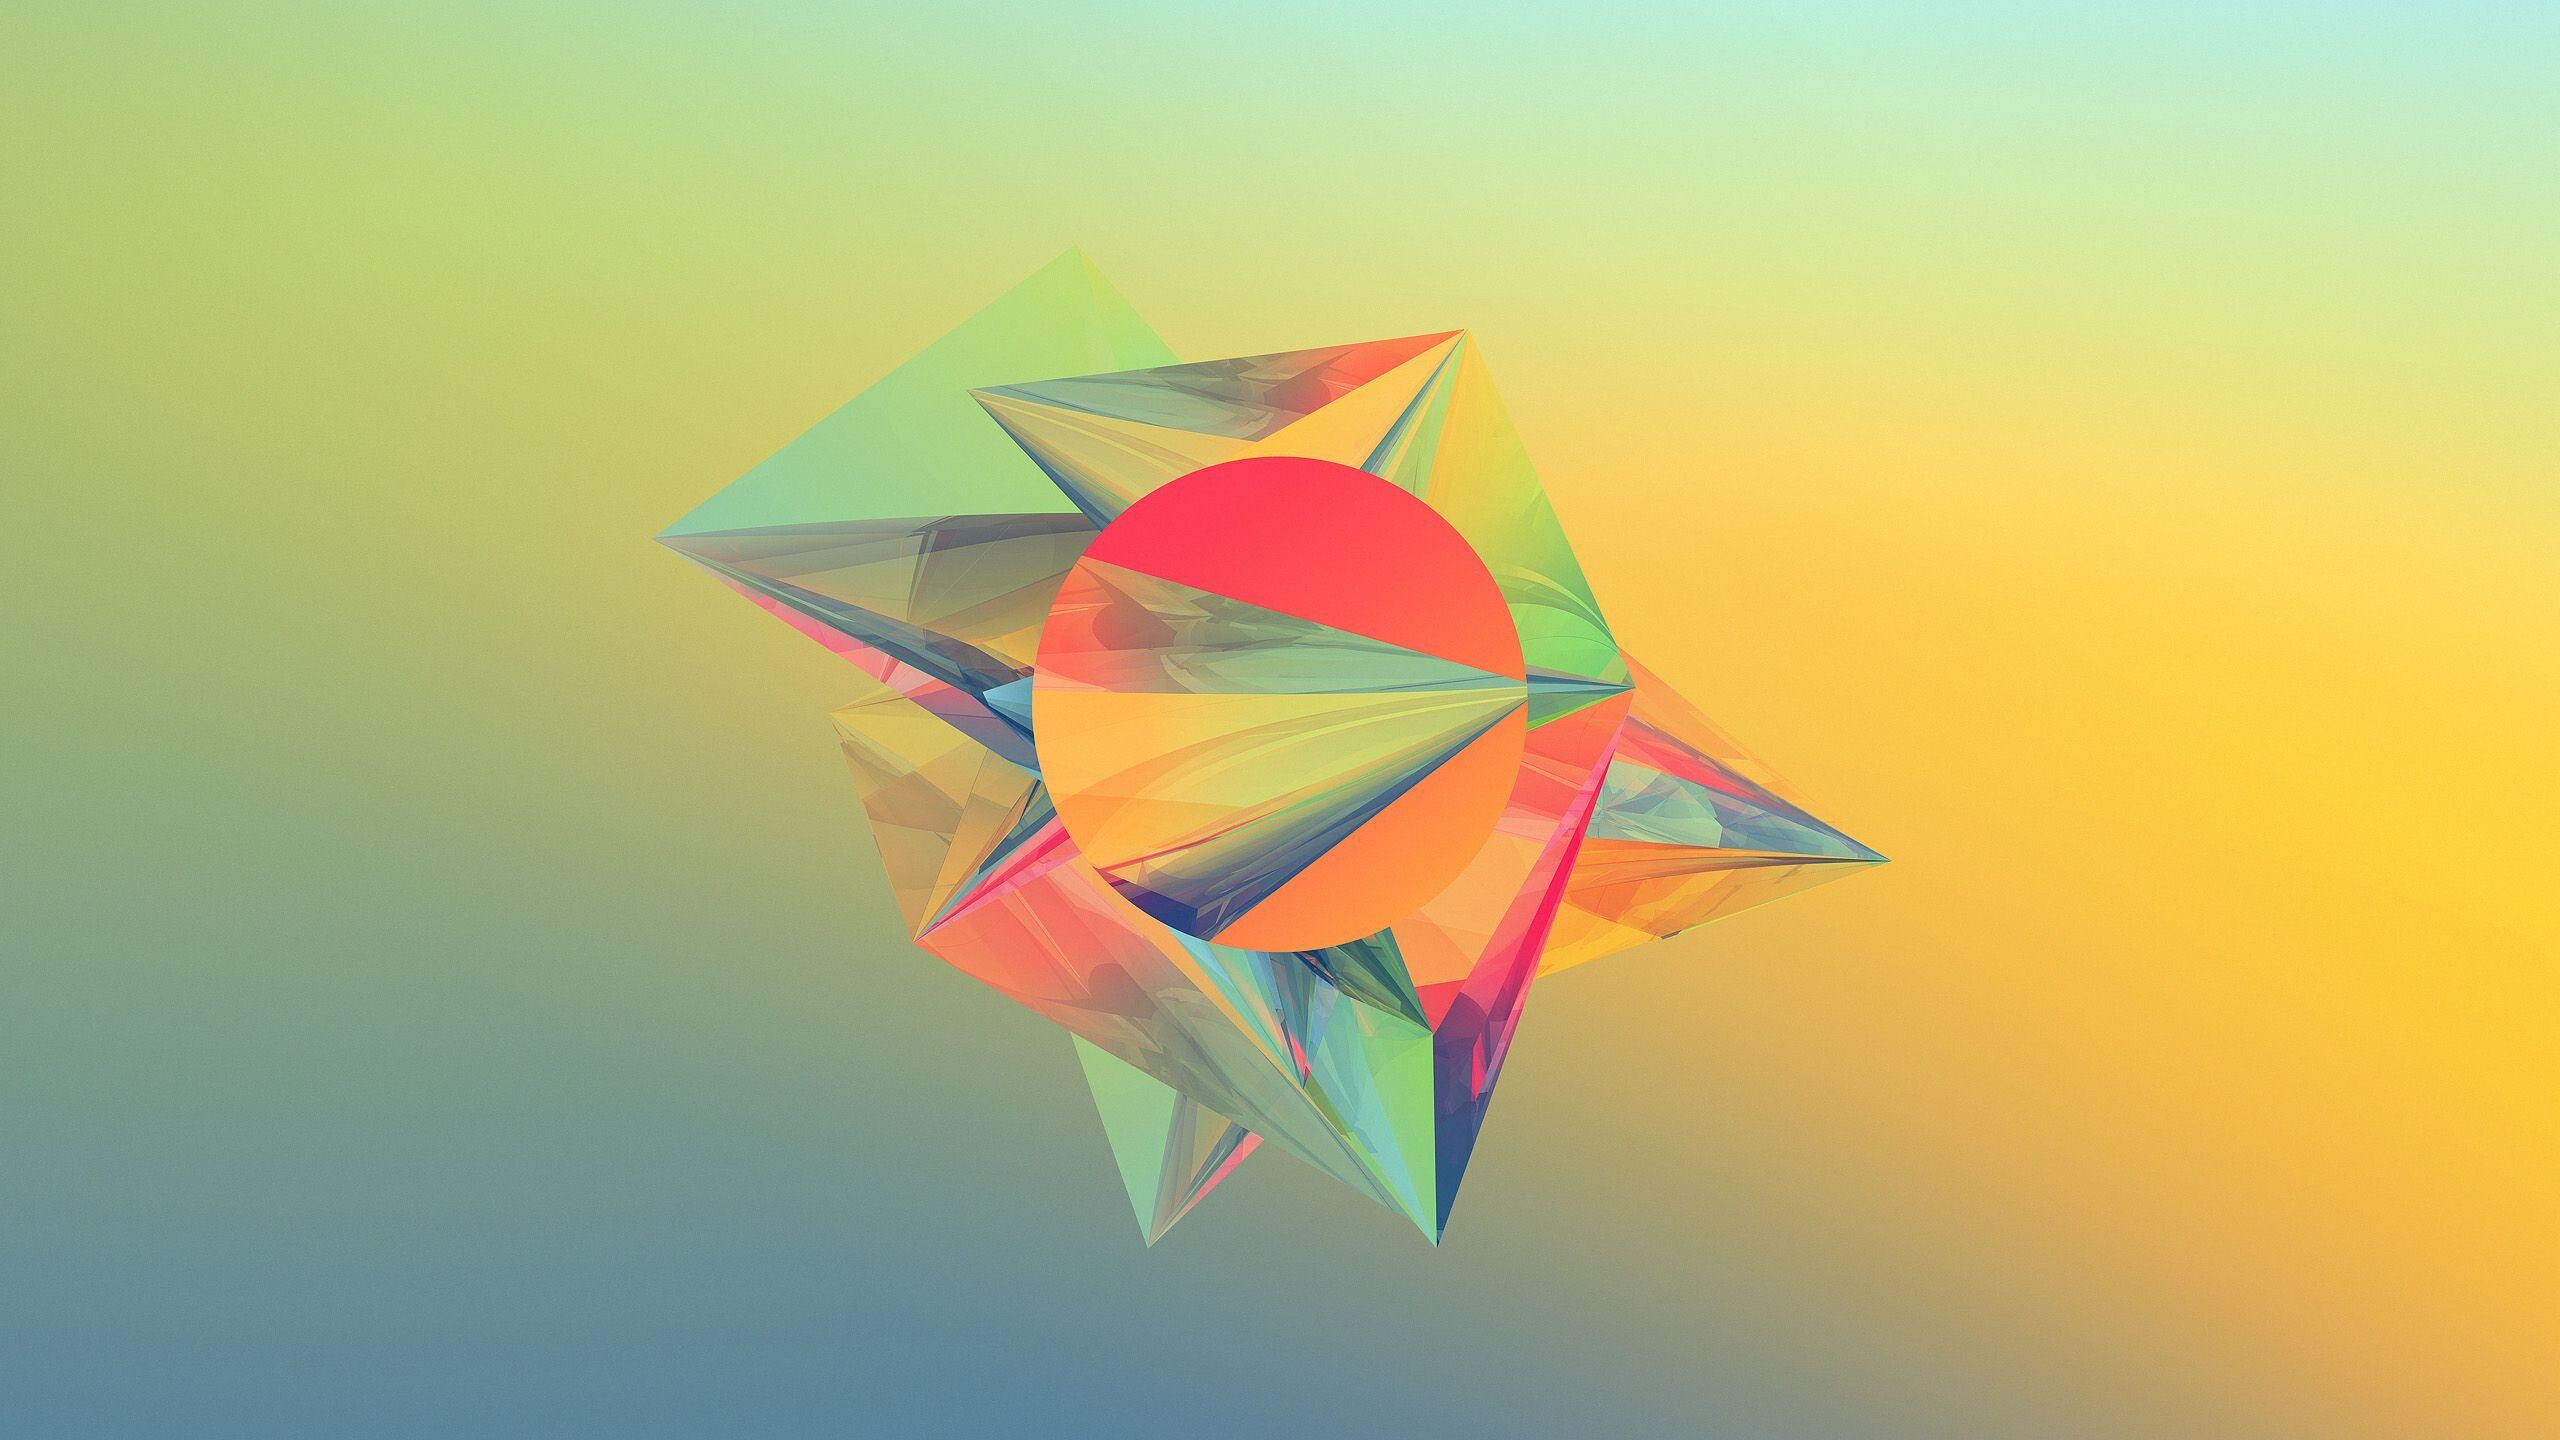 Geometric Abstract: Triangles, Circle, Colorful, Acute angles. 2560x1440 HD Wallpaper.